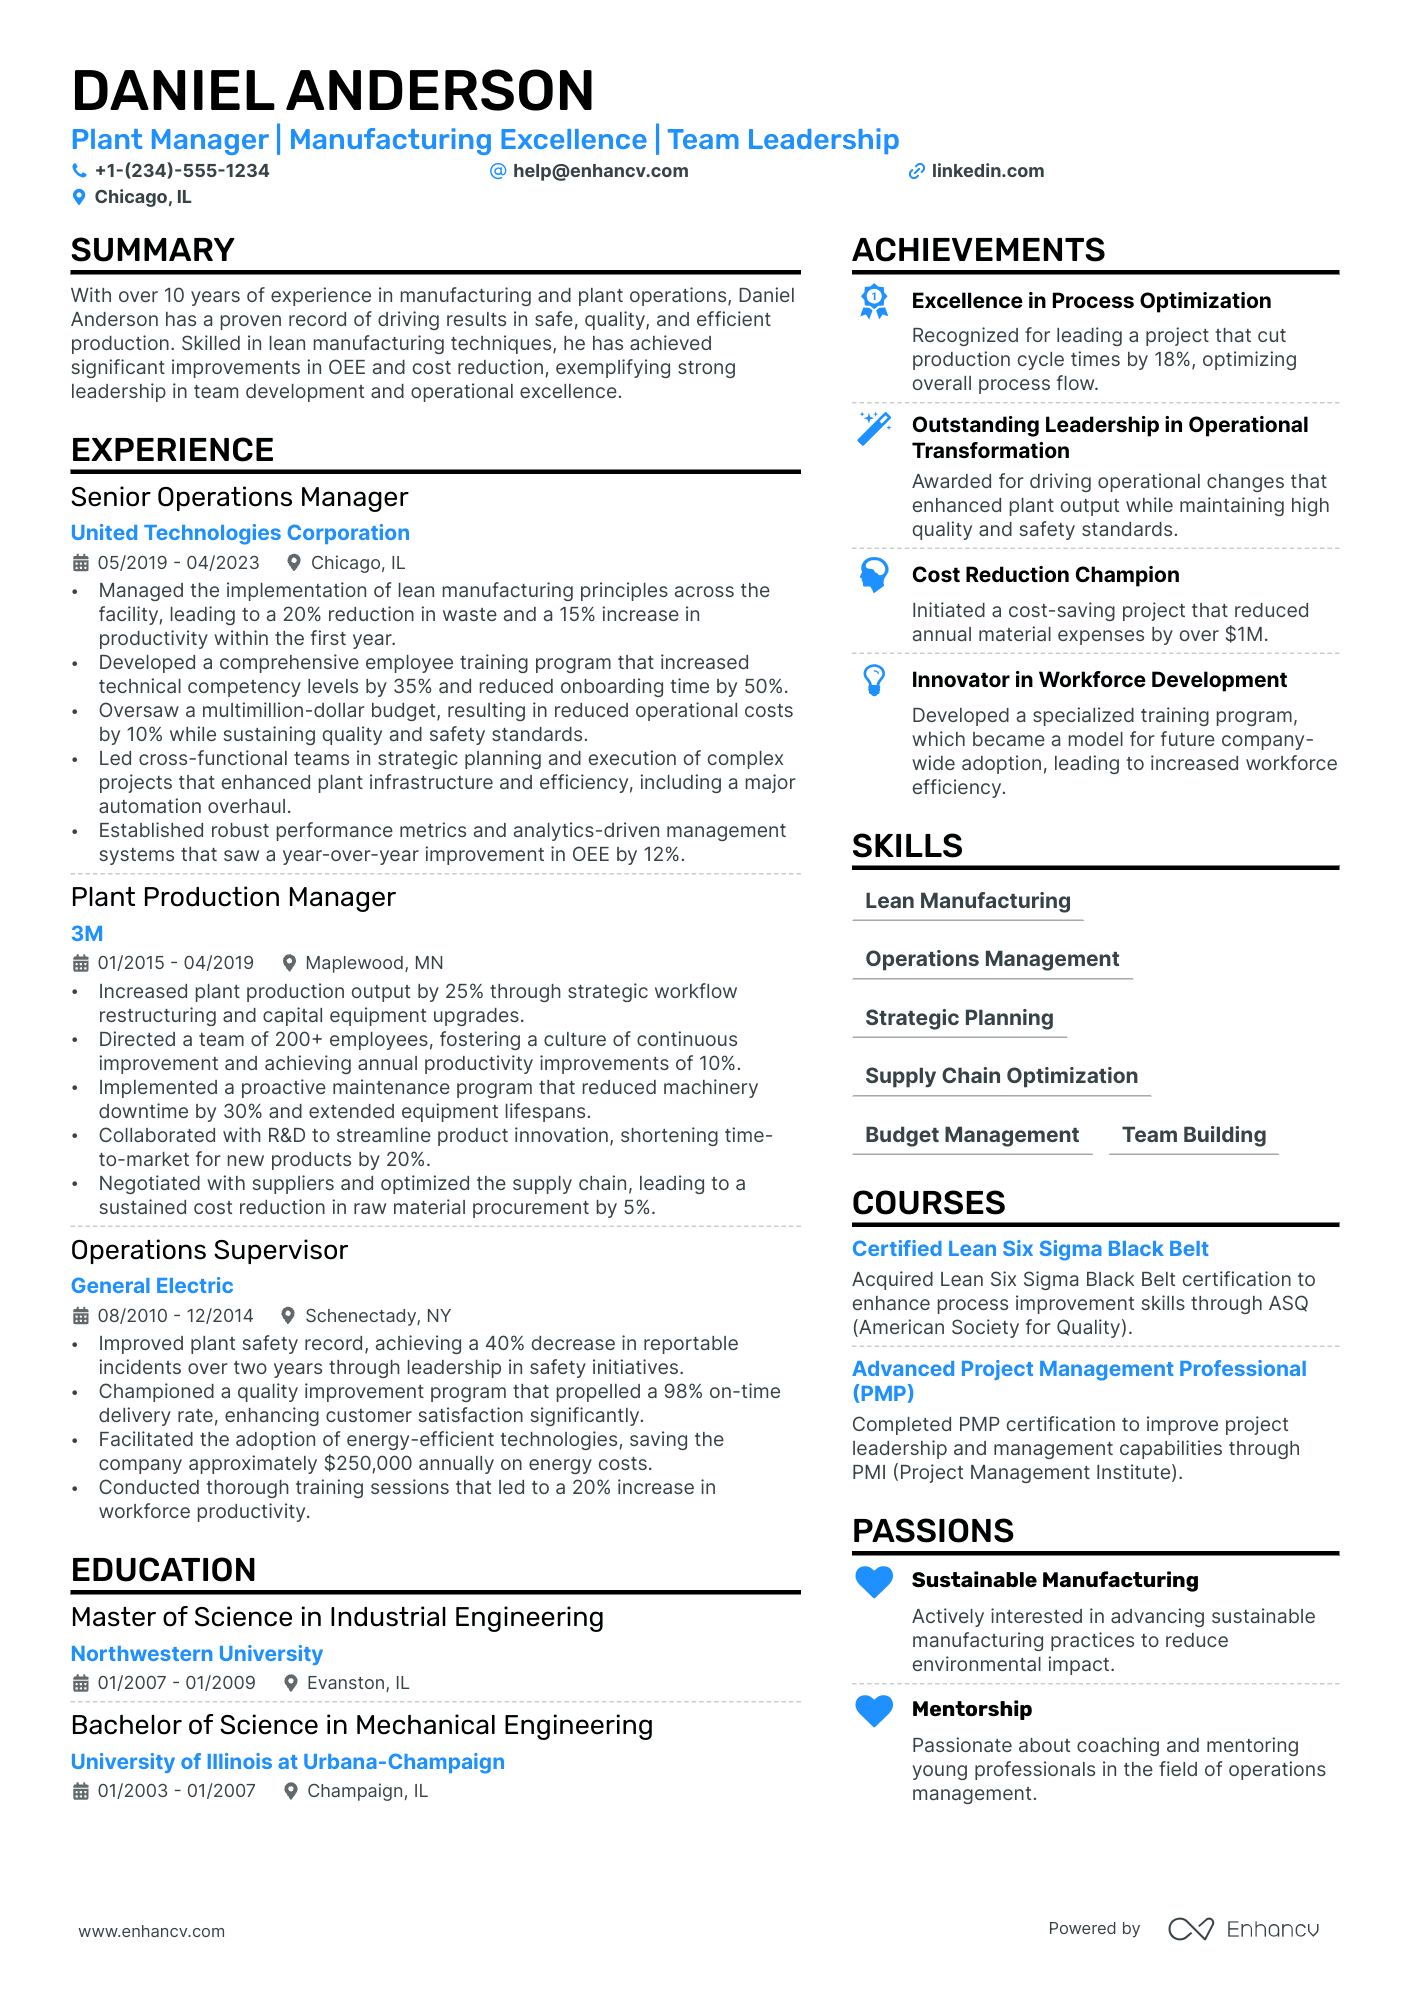 Plant Manager resume example